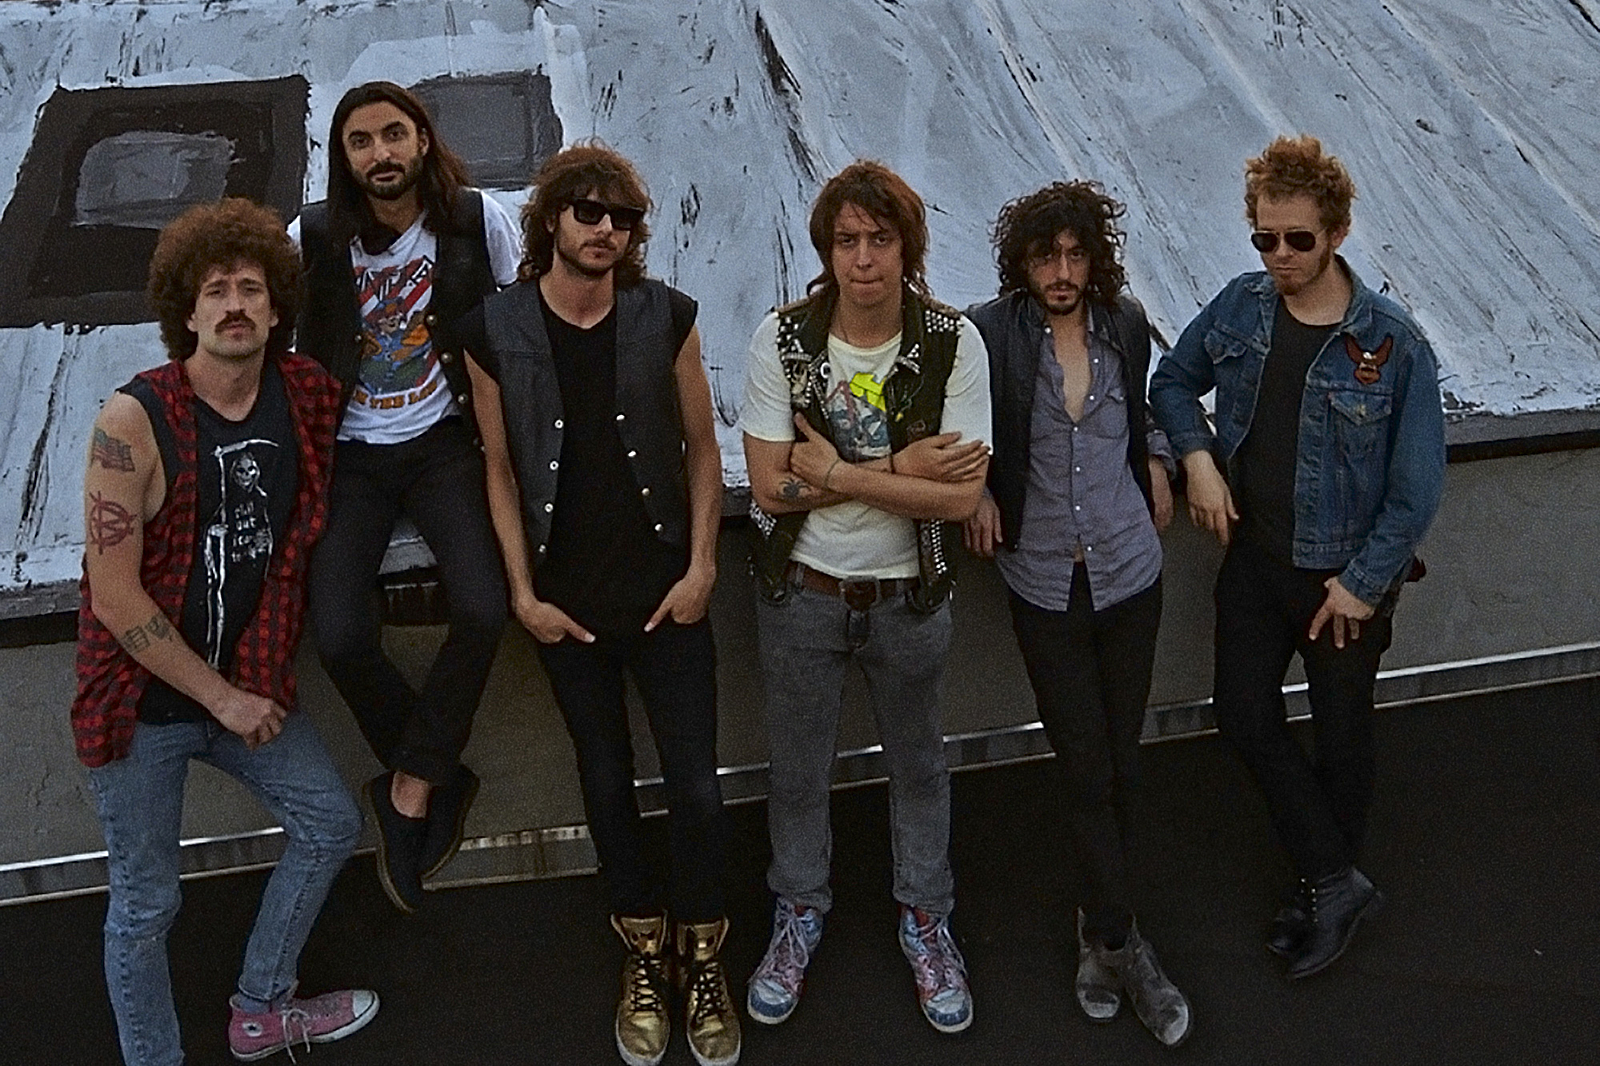 Julian Casablancas’ The Voidz share new track ‘Leave It In My Dreams’